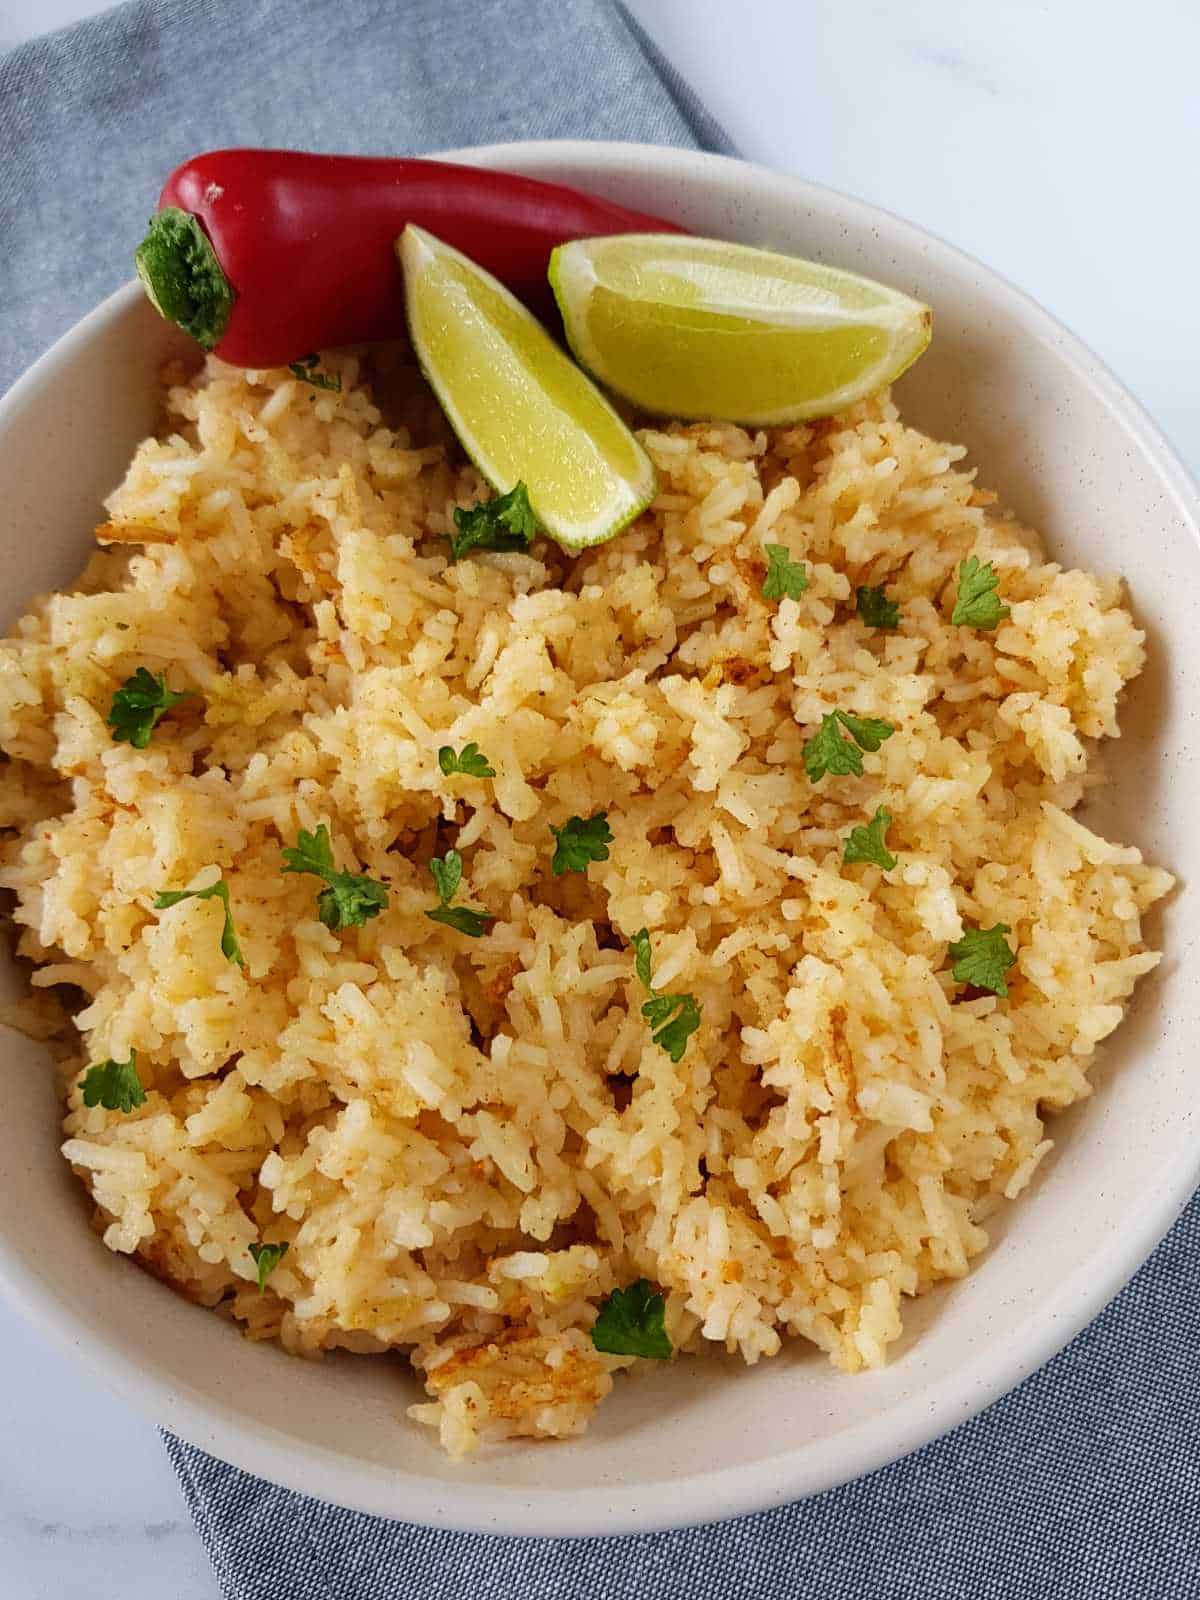 Chili lime rice garnished with herbs, lime wedges and a red chili.